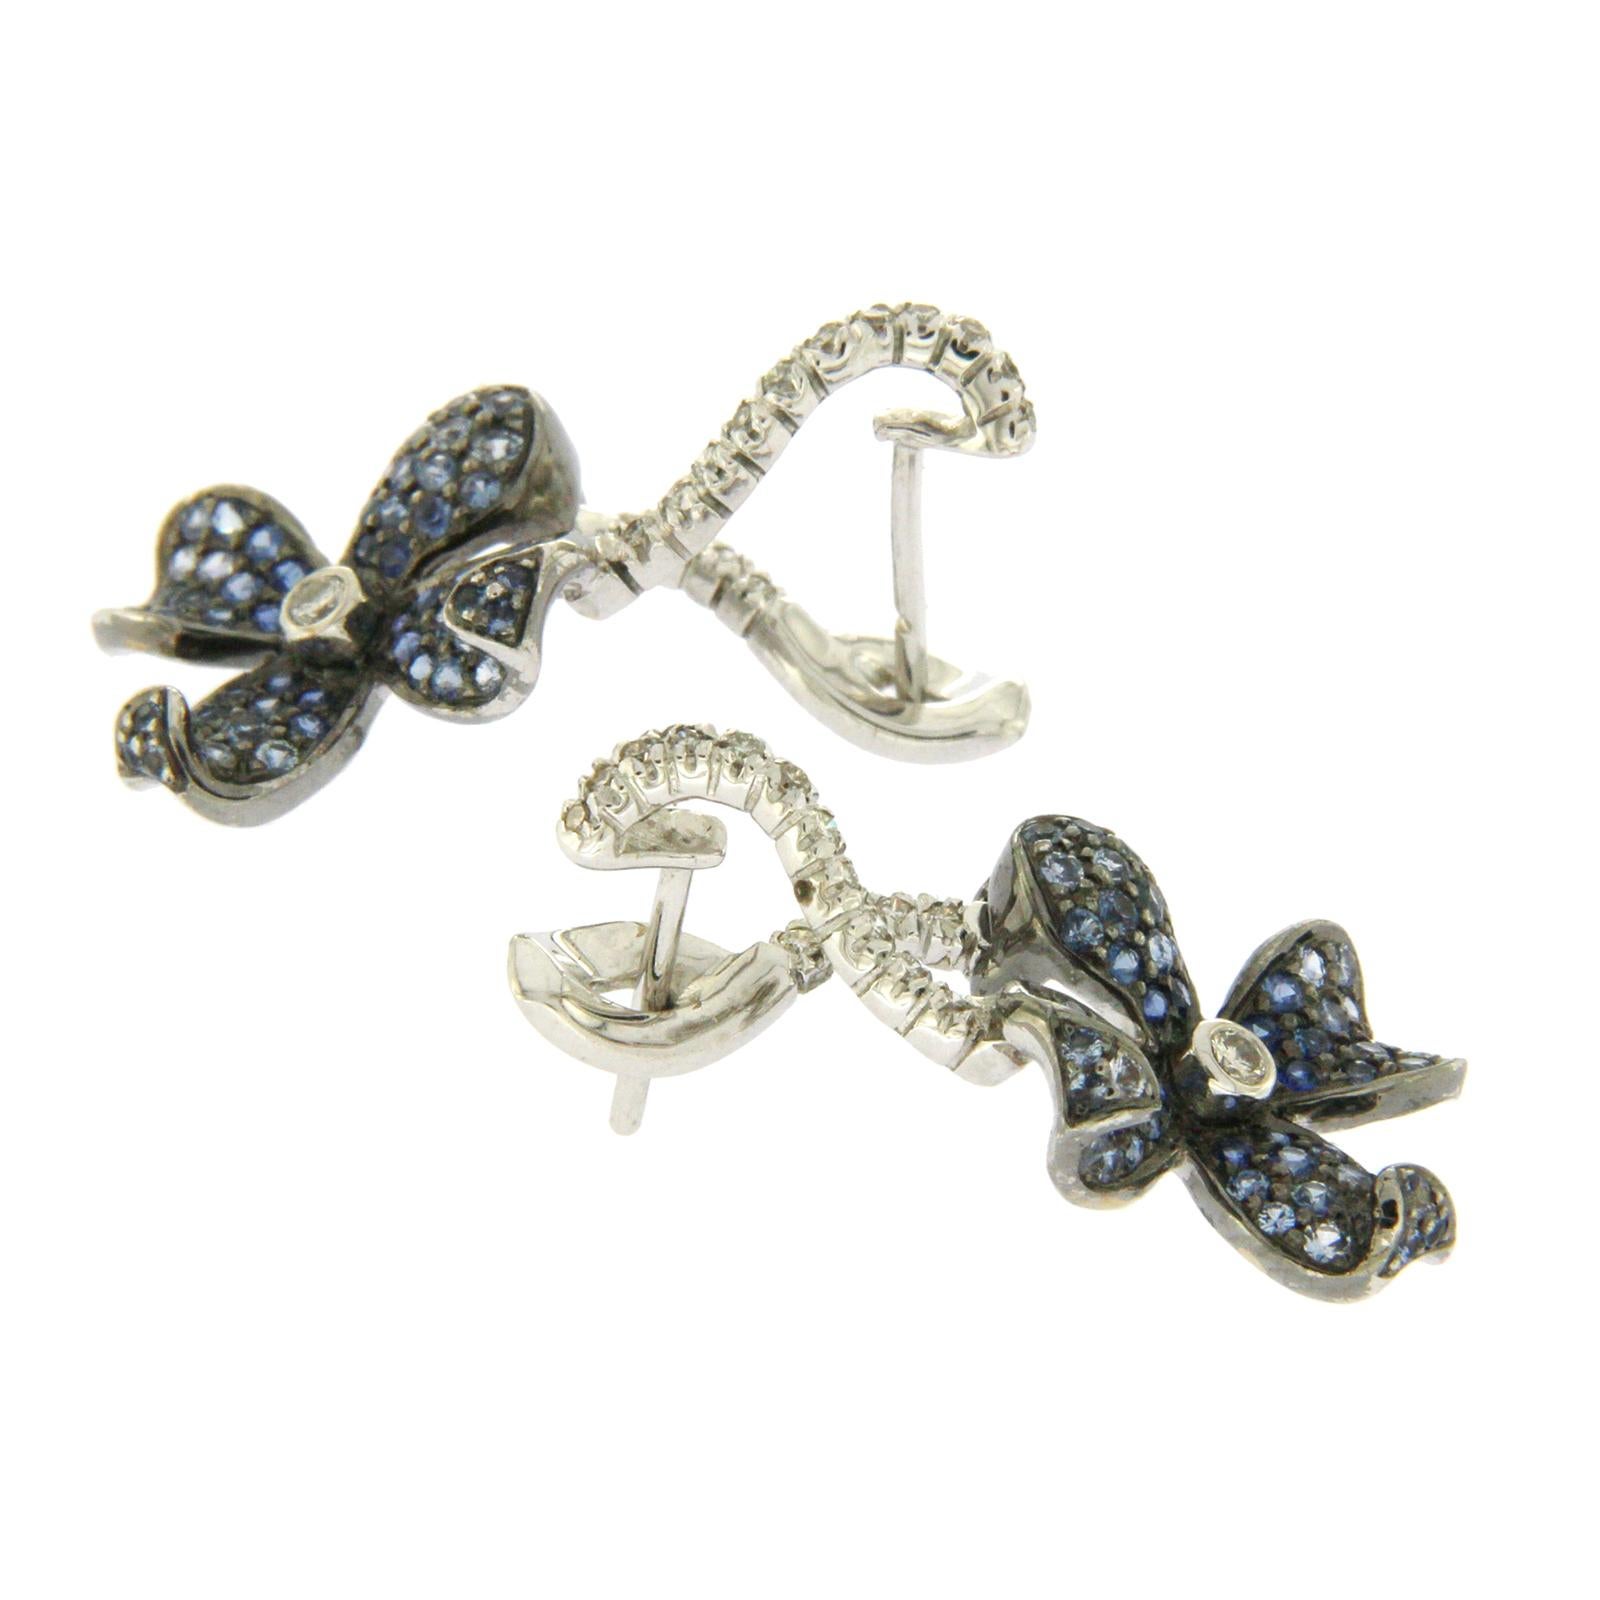 18k Gold Pave 0.19 Ct Diamonds & 1.01 Ct Blue Sapphire Flower Earrings In Excellent Condition For Sale In Los Angeles, CA